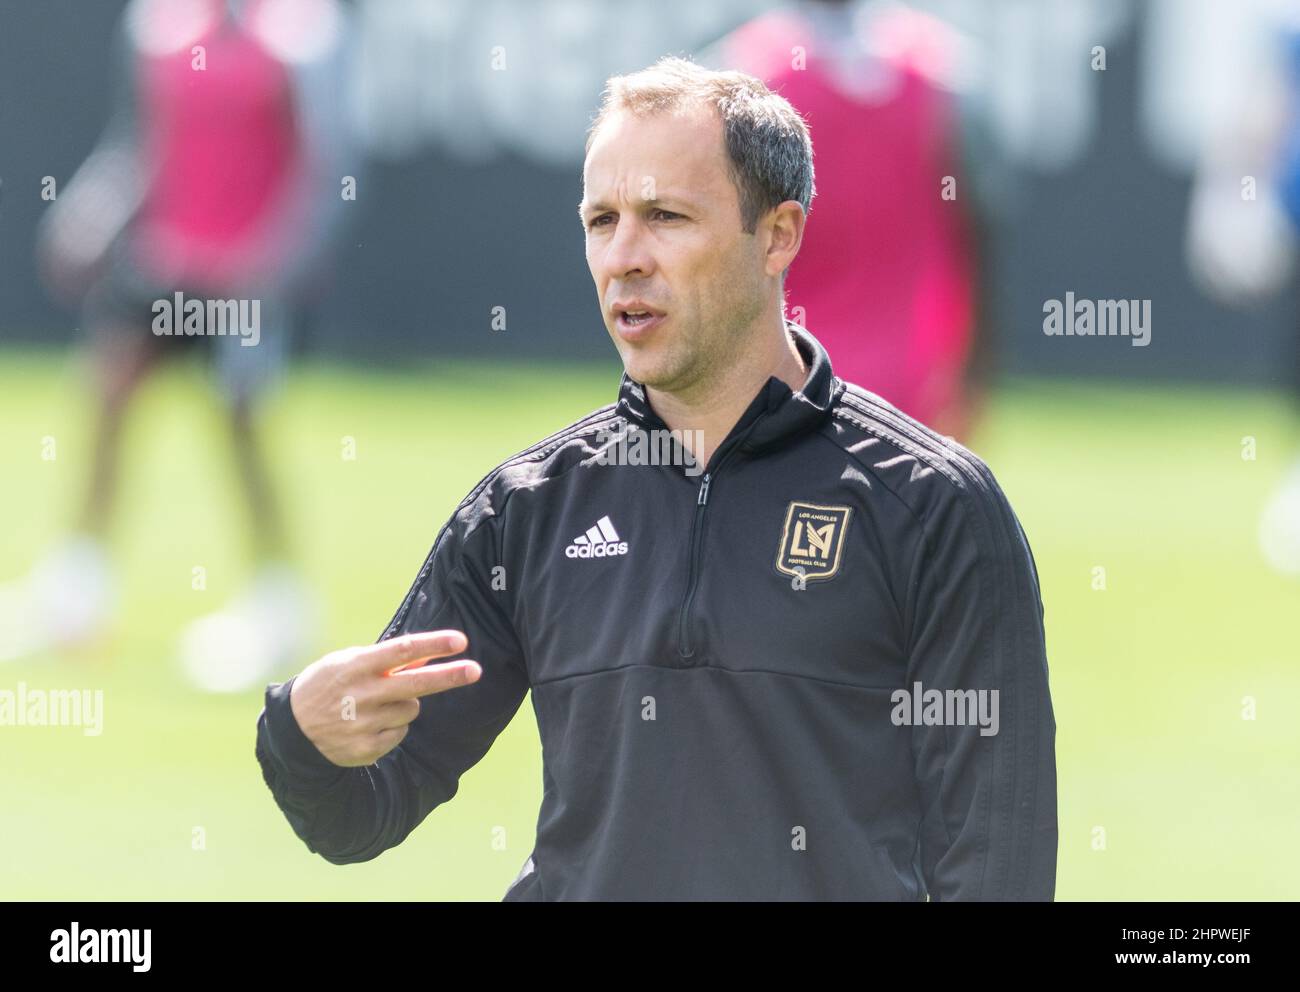 Los Angeles, USA. 23rd Feb, 2022. Steven Cherundolo stands on the training pitch of the Los Angeles Football Club and gesticulates. The former Bundesliga professional from Hannover 96 is about to start his first season as head coach in MLS. Credit: Maximilian Haupt/dpa/Alamy Live News Stock Photo